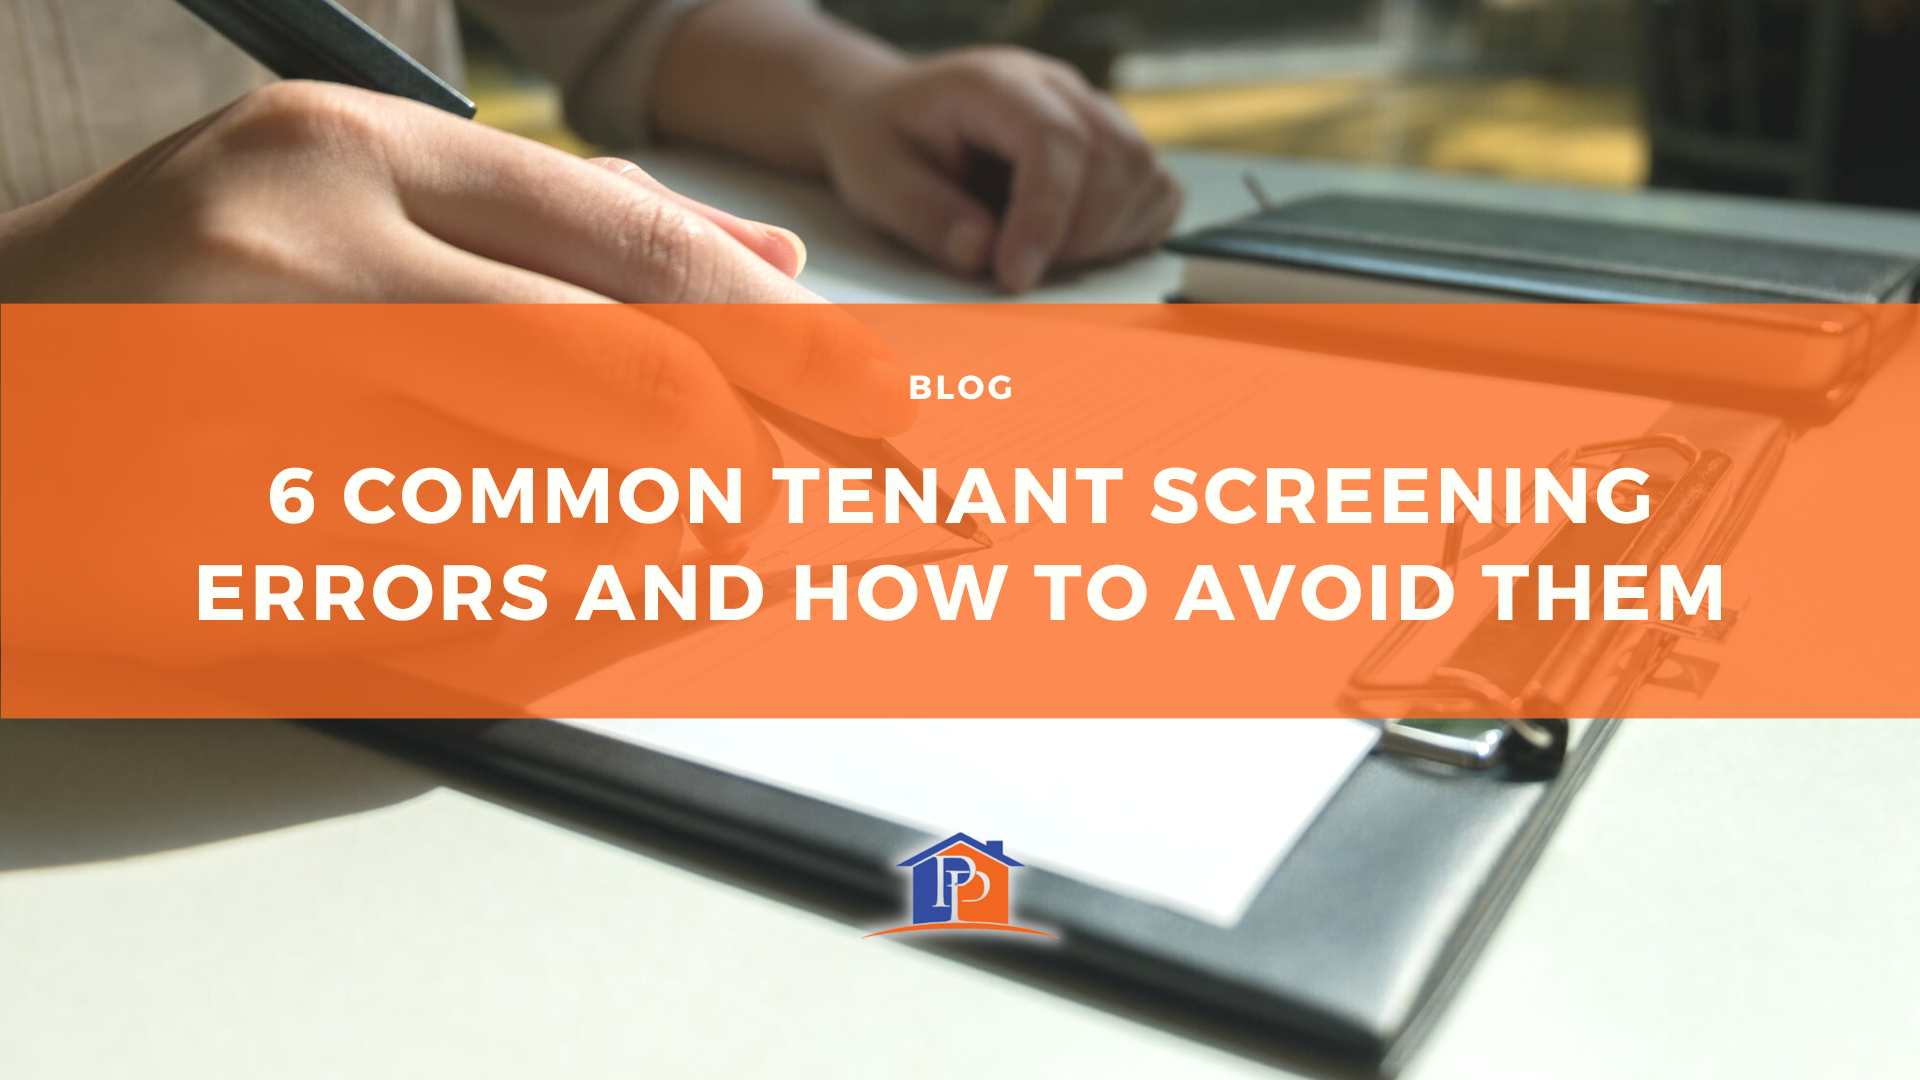 6 Common Tenant Screening Errors and How to Avoid Them